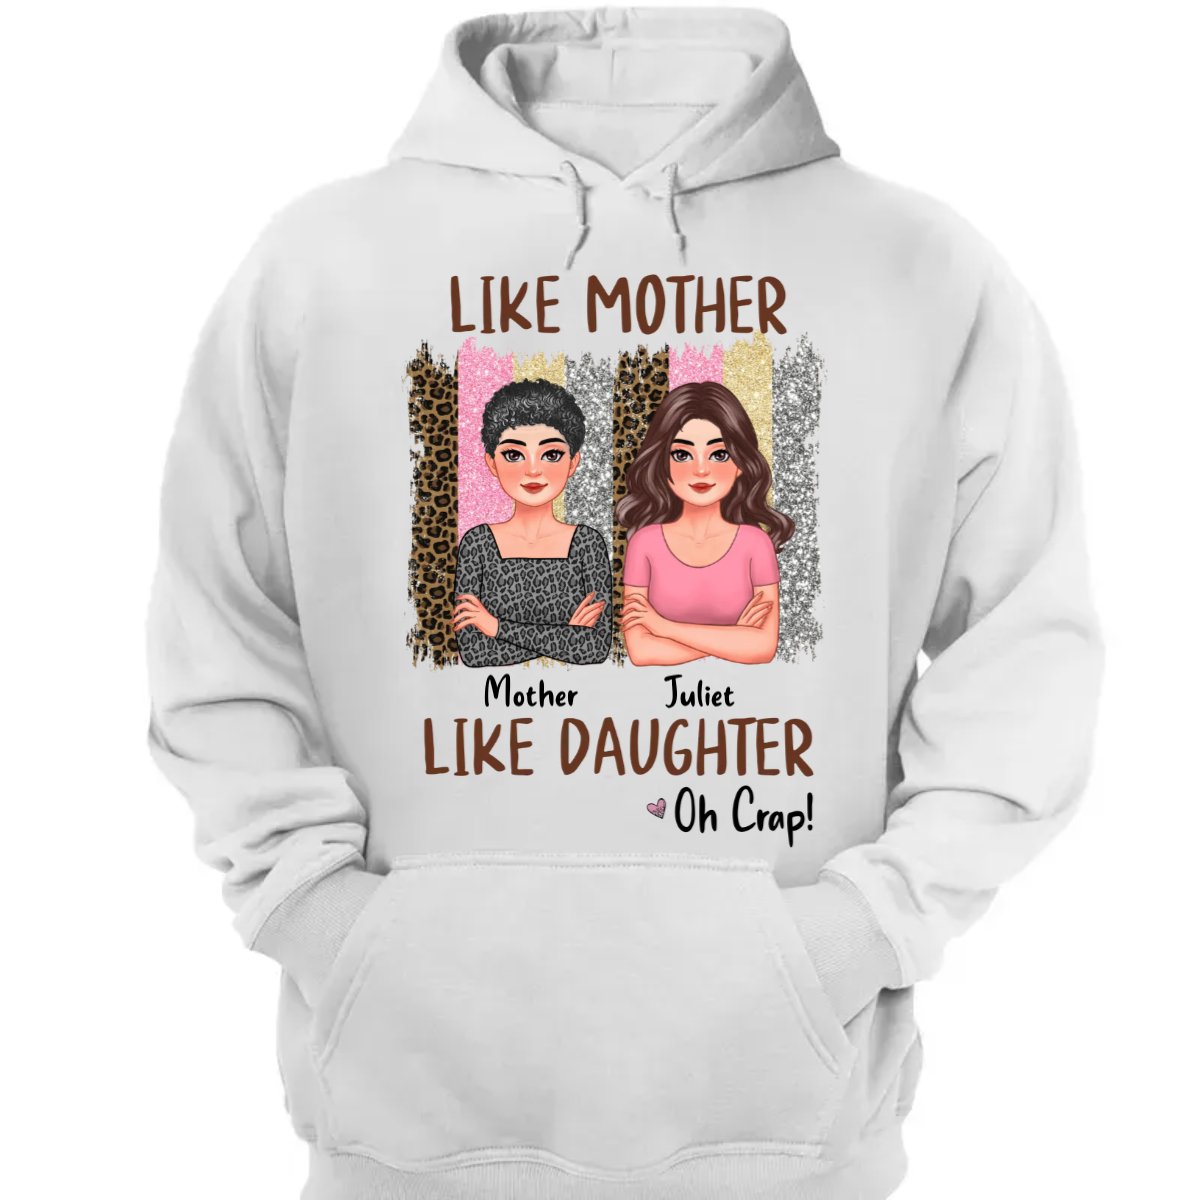 Mother - Like Mother Like Daughter - Personalized Unisex T - Shirt, Hoodie , Sweatshirt - The Next Custom Gift